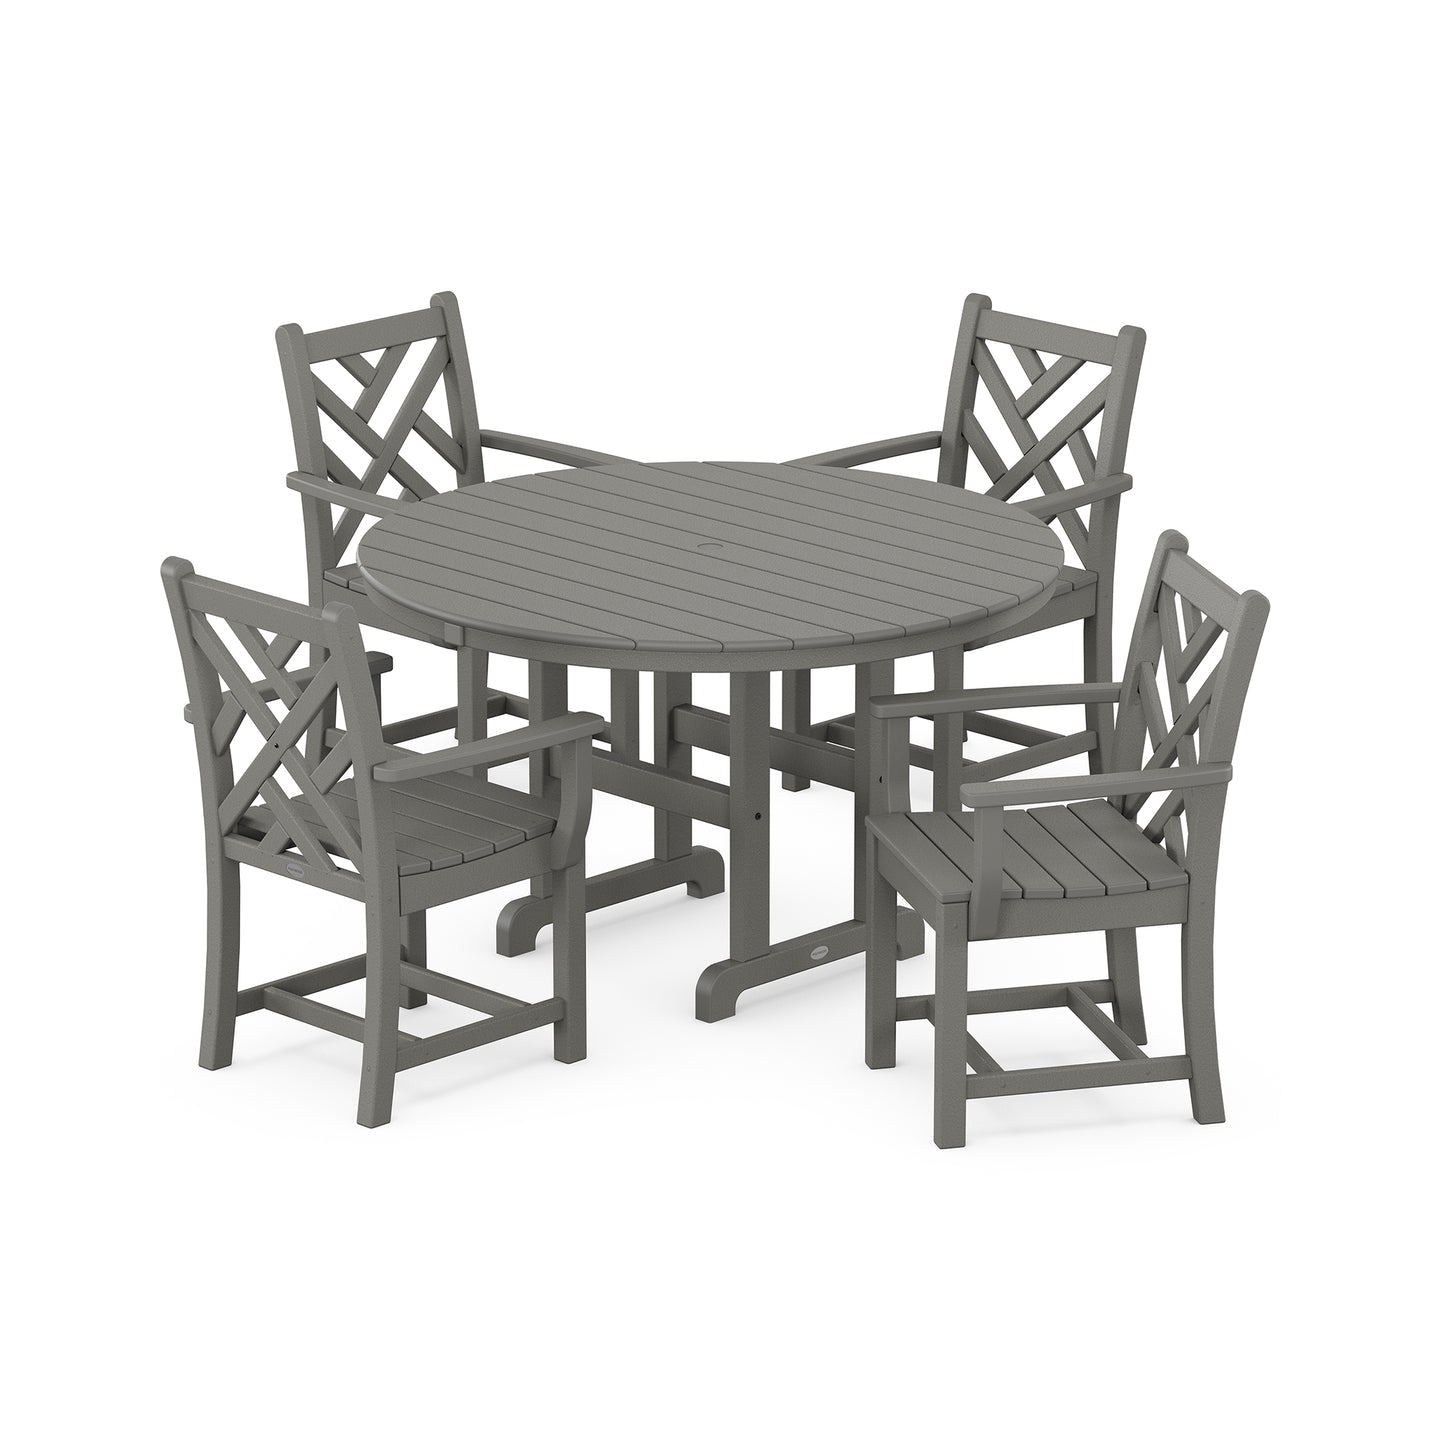 A gray patio dining set crafted from POLYWOOD® recycled lumber, featuring a round table and four matching chairs with an x-back design, all on a plain white background.